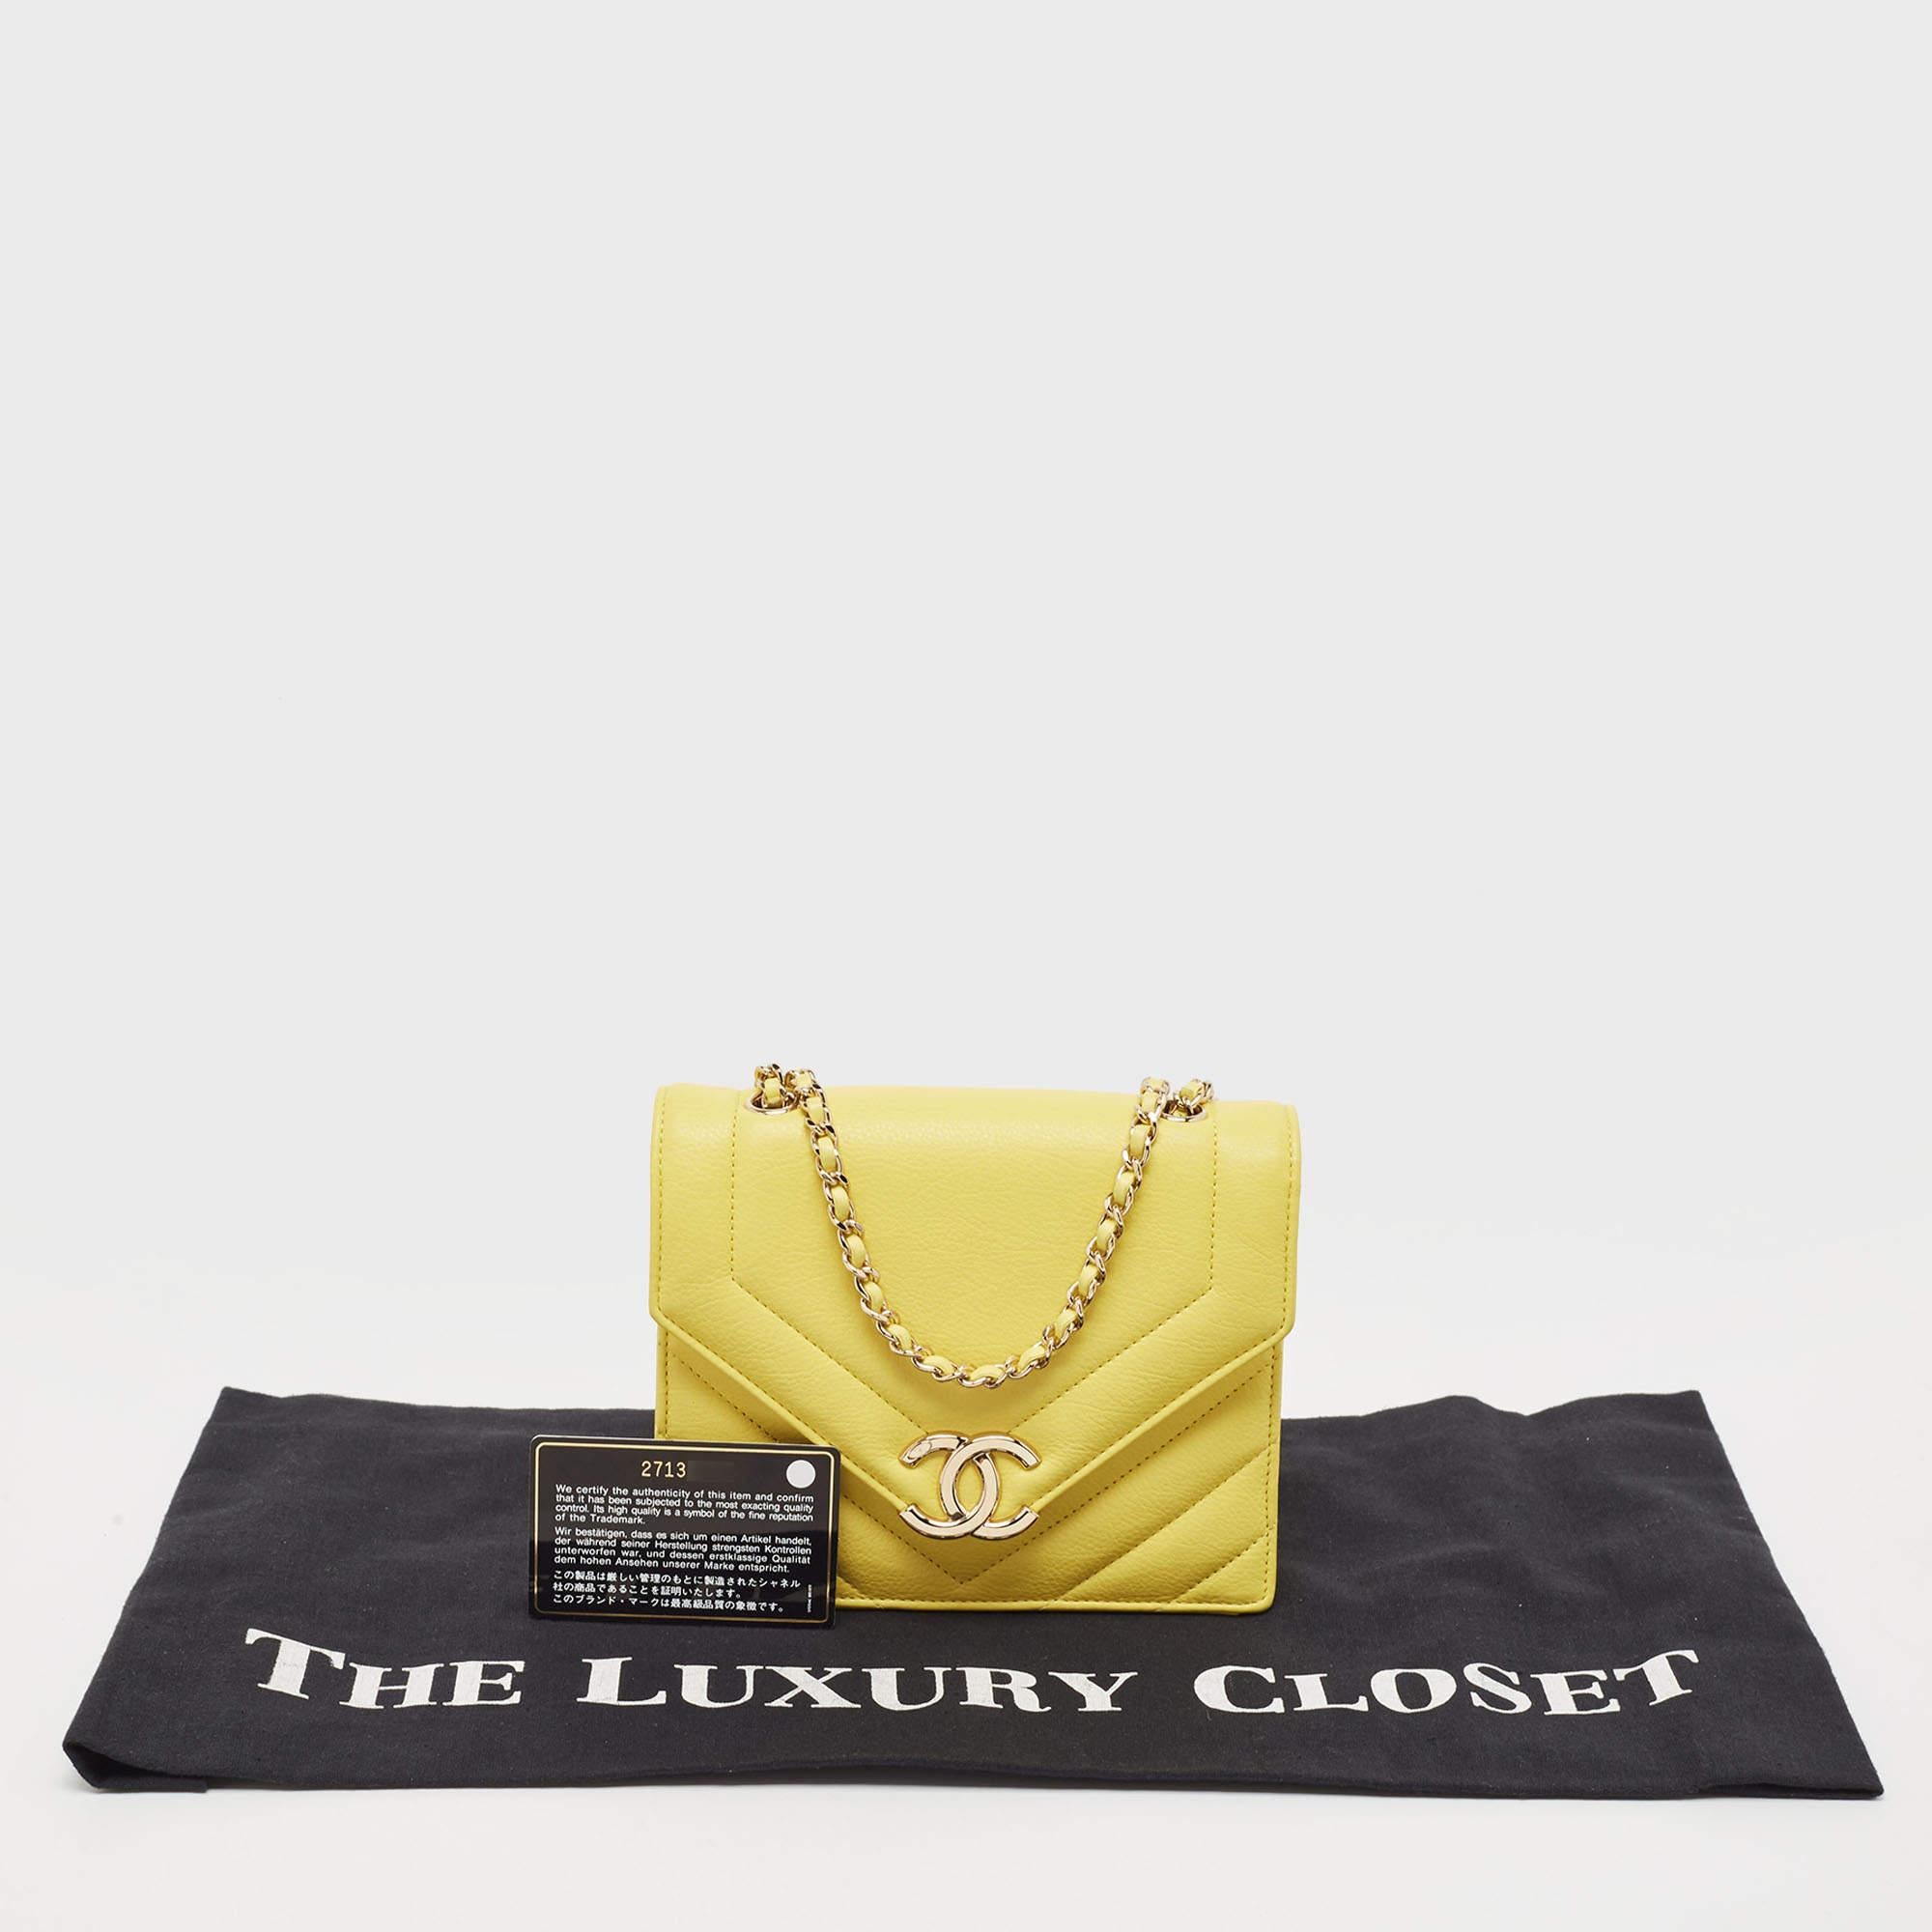 Chanel Yellow Leather Small Vintage Chevron Flap Bag 7